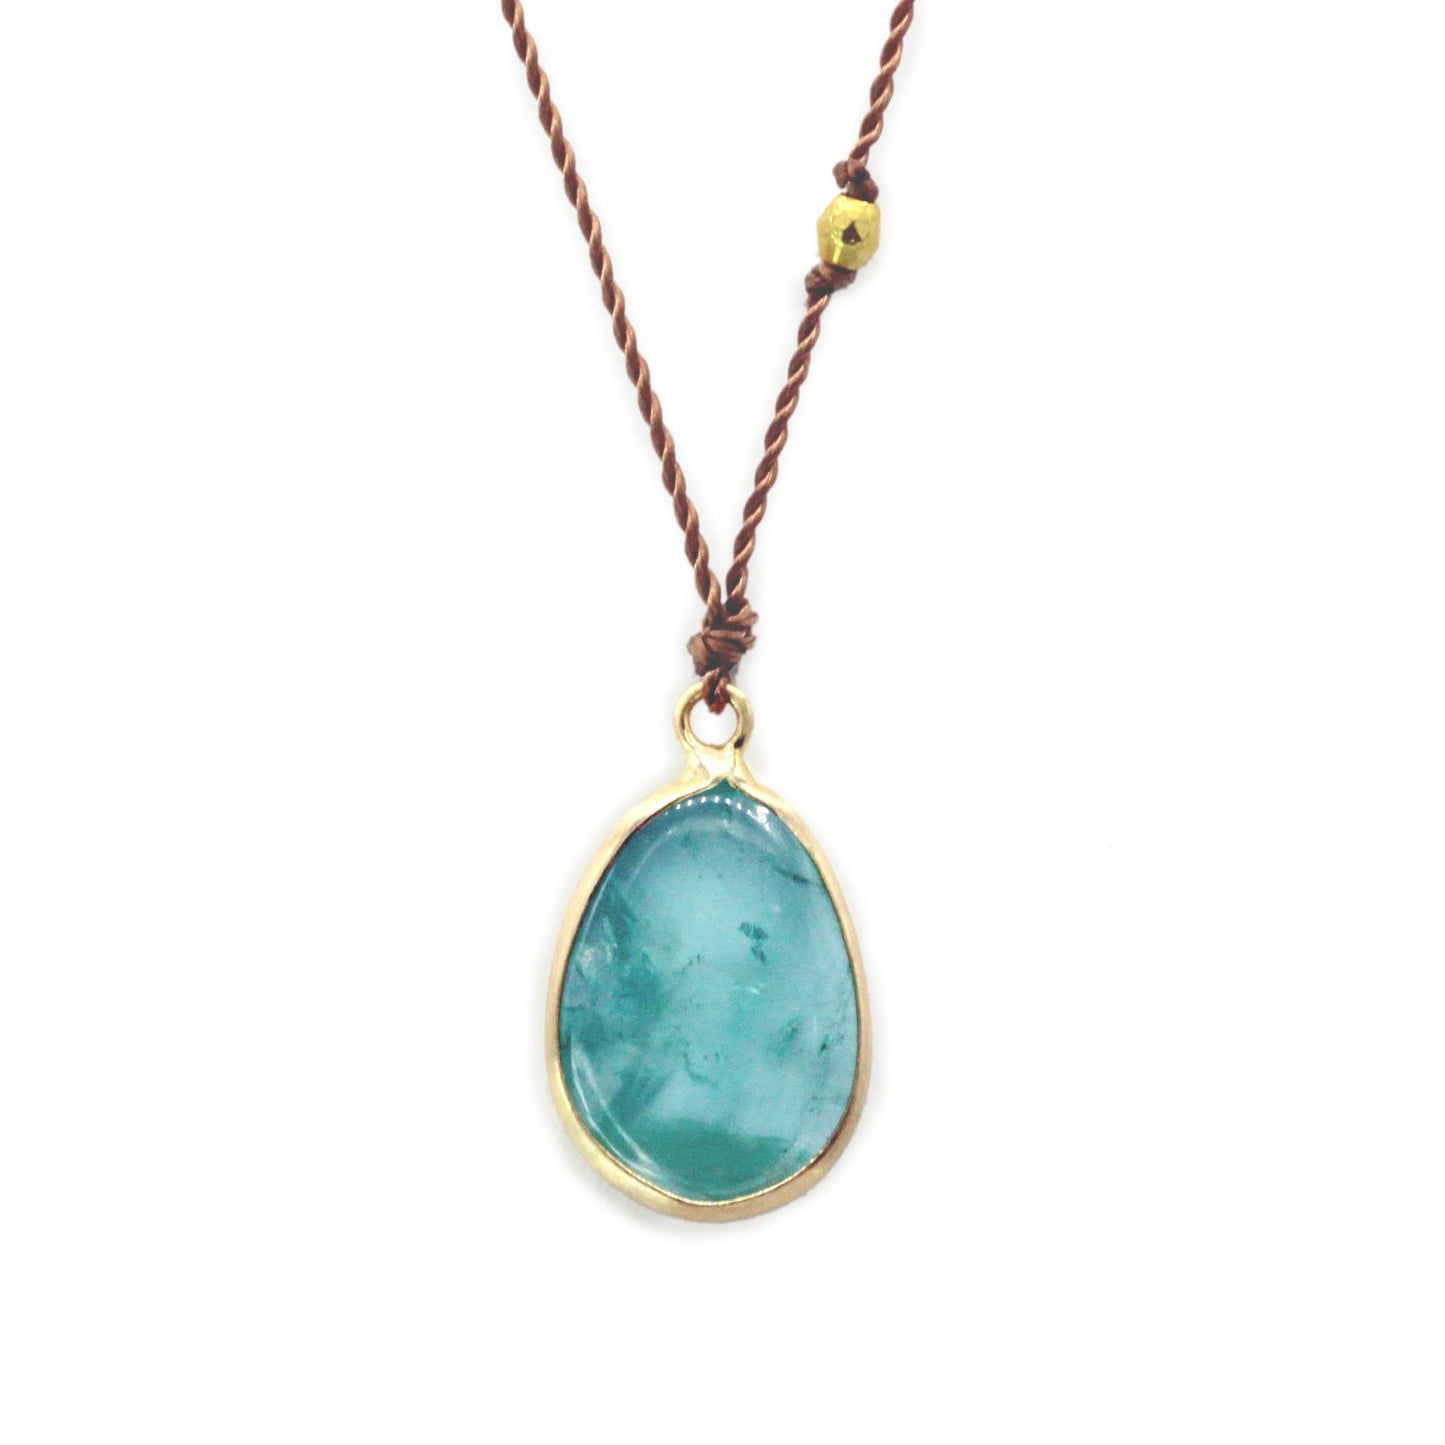 Margaret Solow Jewelry | Emerald Cabochon + 14k Gold Drop Necklace | Firecracker